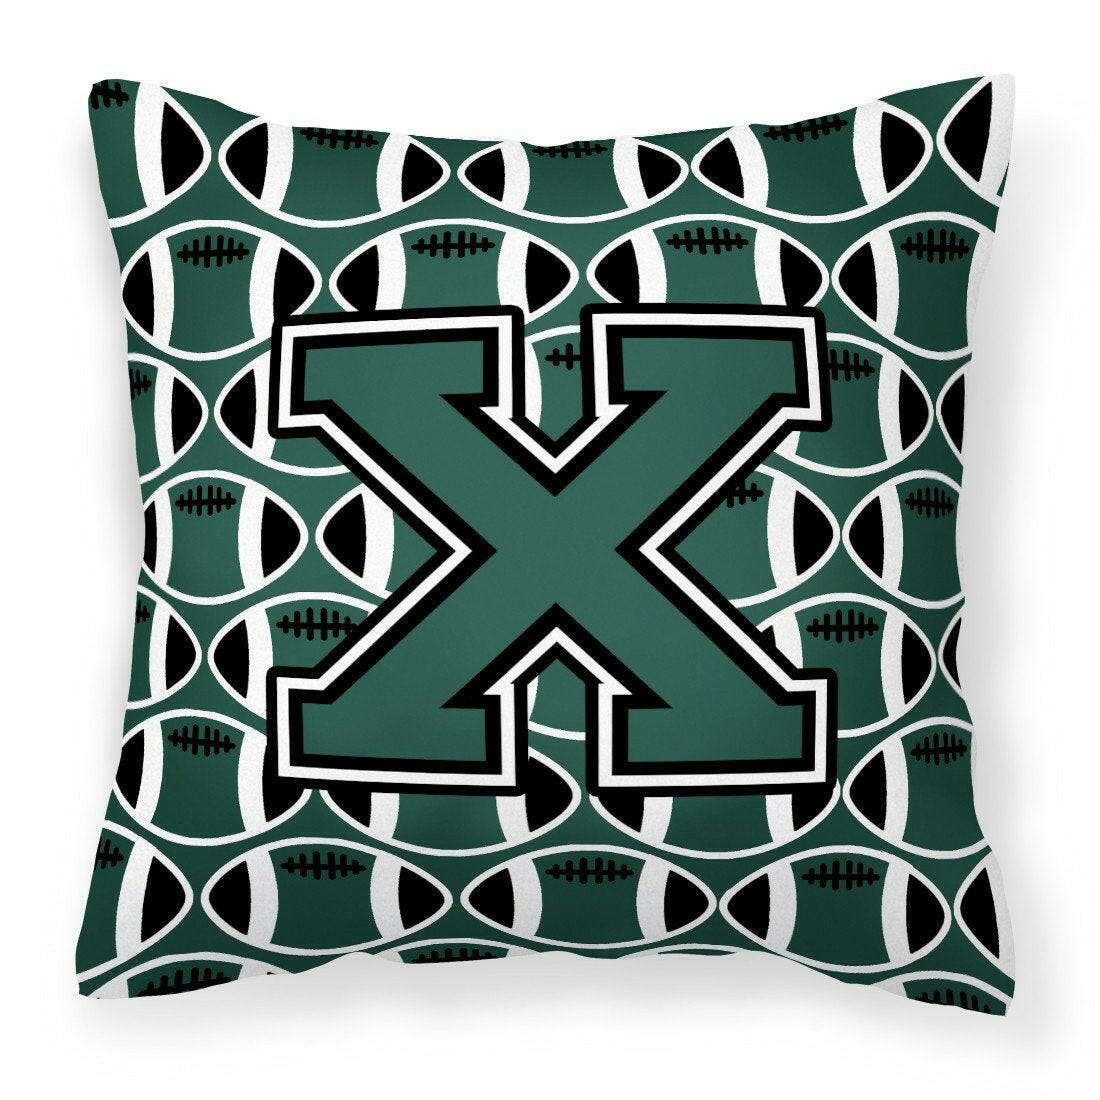 Letter X Football Green and White Fabric Decorative Pillow CJ1071-XPW1414 by Caroline's Treasures